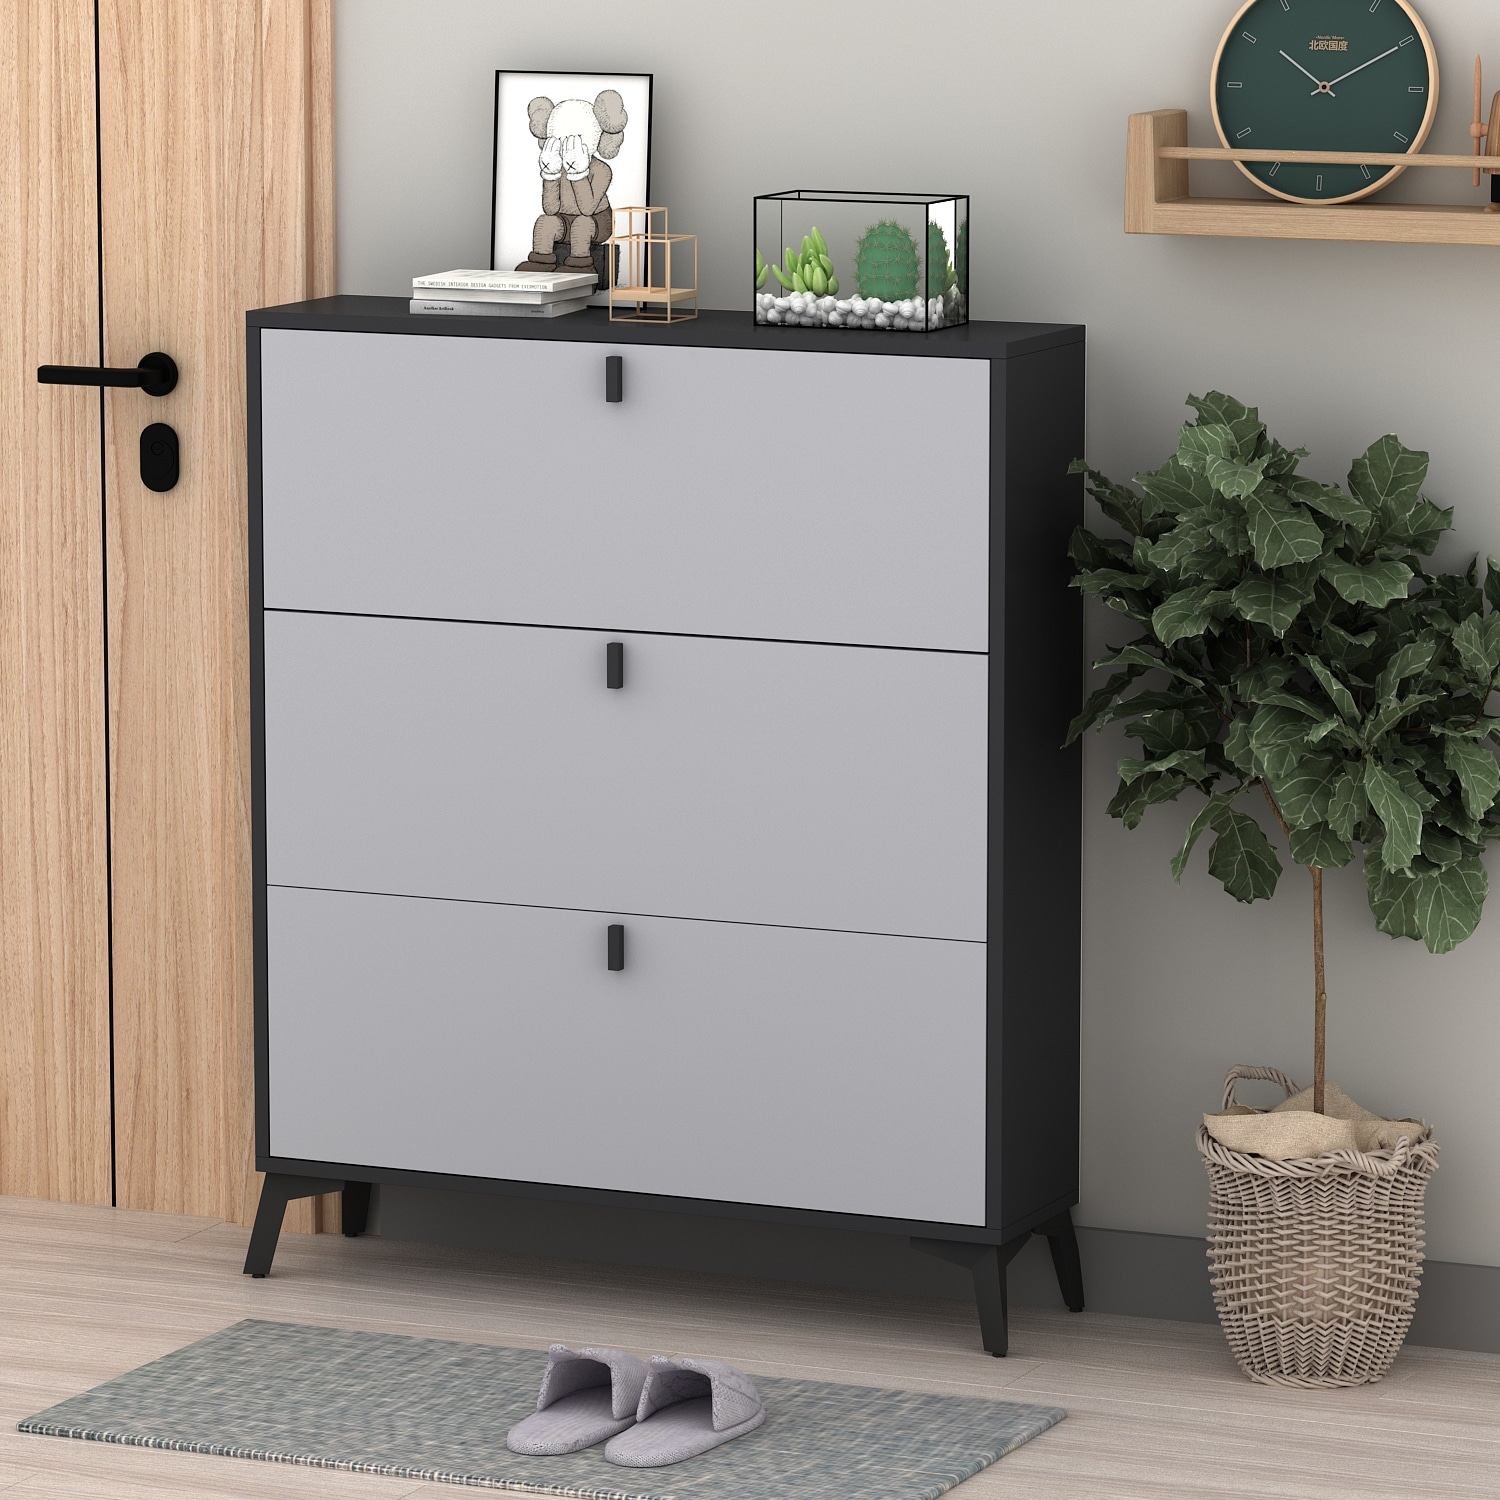 https://ak1.ostkcdn.com/images/products/is/images/direct/5862ddbbe369b3aa7158f7bf6ad34abc6f6e67d6/FAMAPY-3-Drawer-Entryway-Shoe-Cabinet-Wood-Shoe-Storage-Drawer.jpg